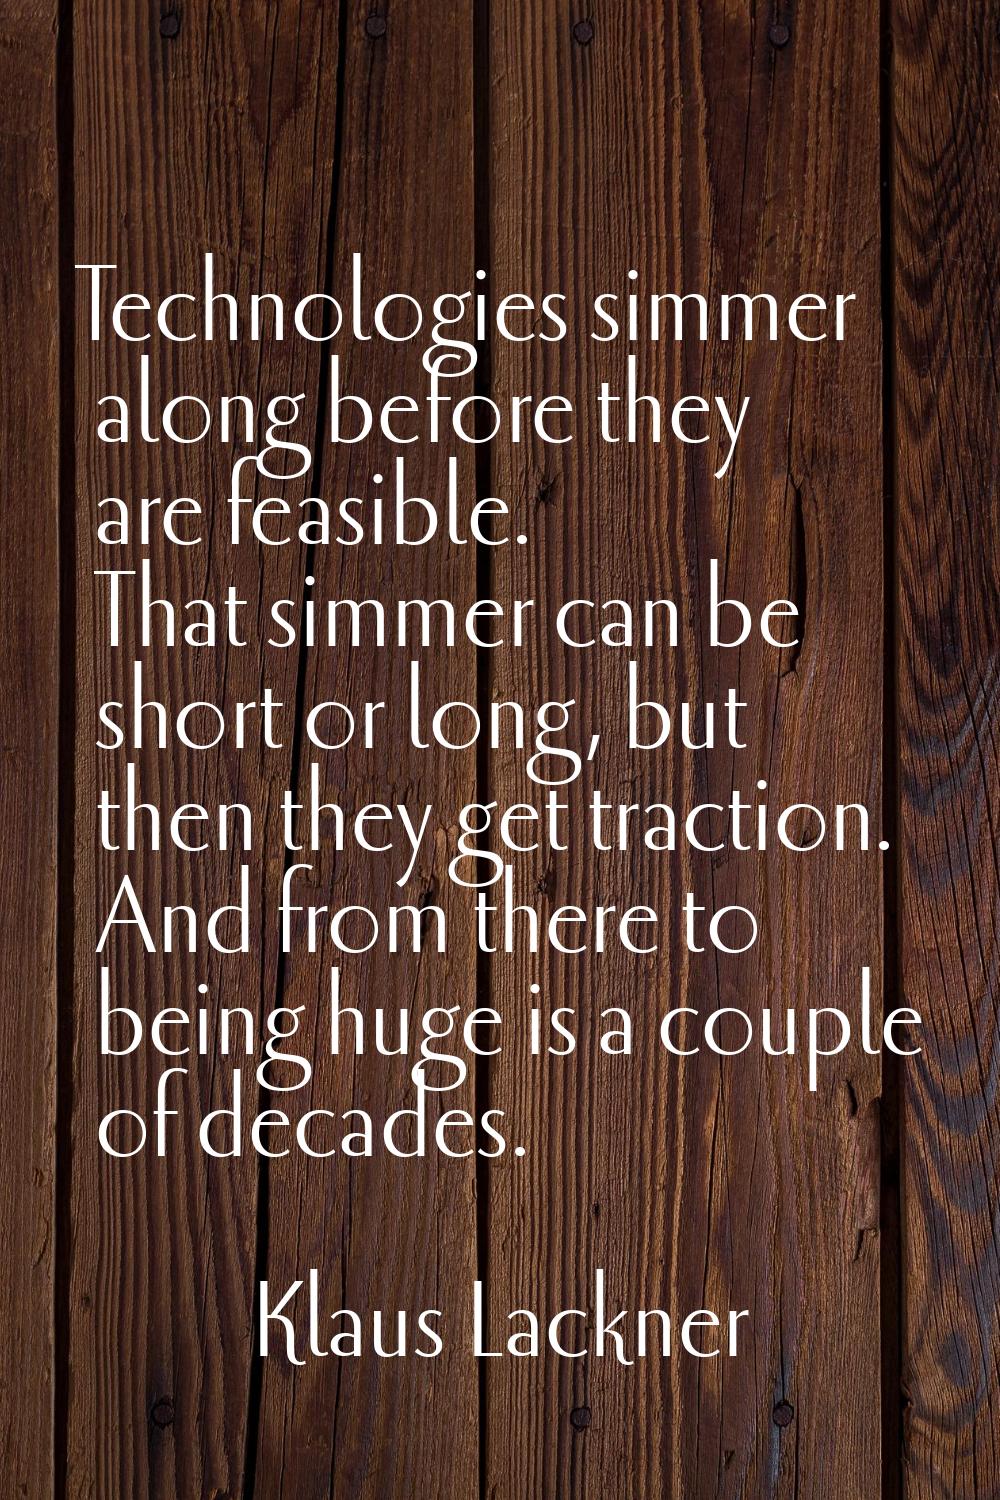 Technologies simmer along before they are feasible. That simmer can be short or long, but then they